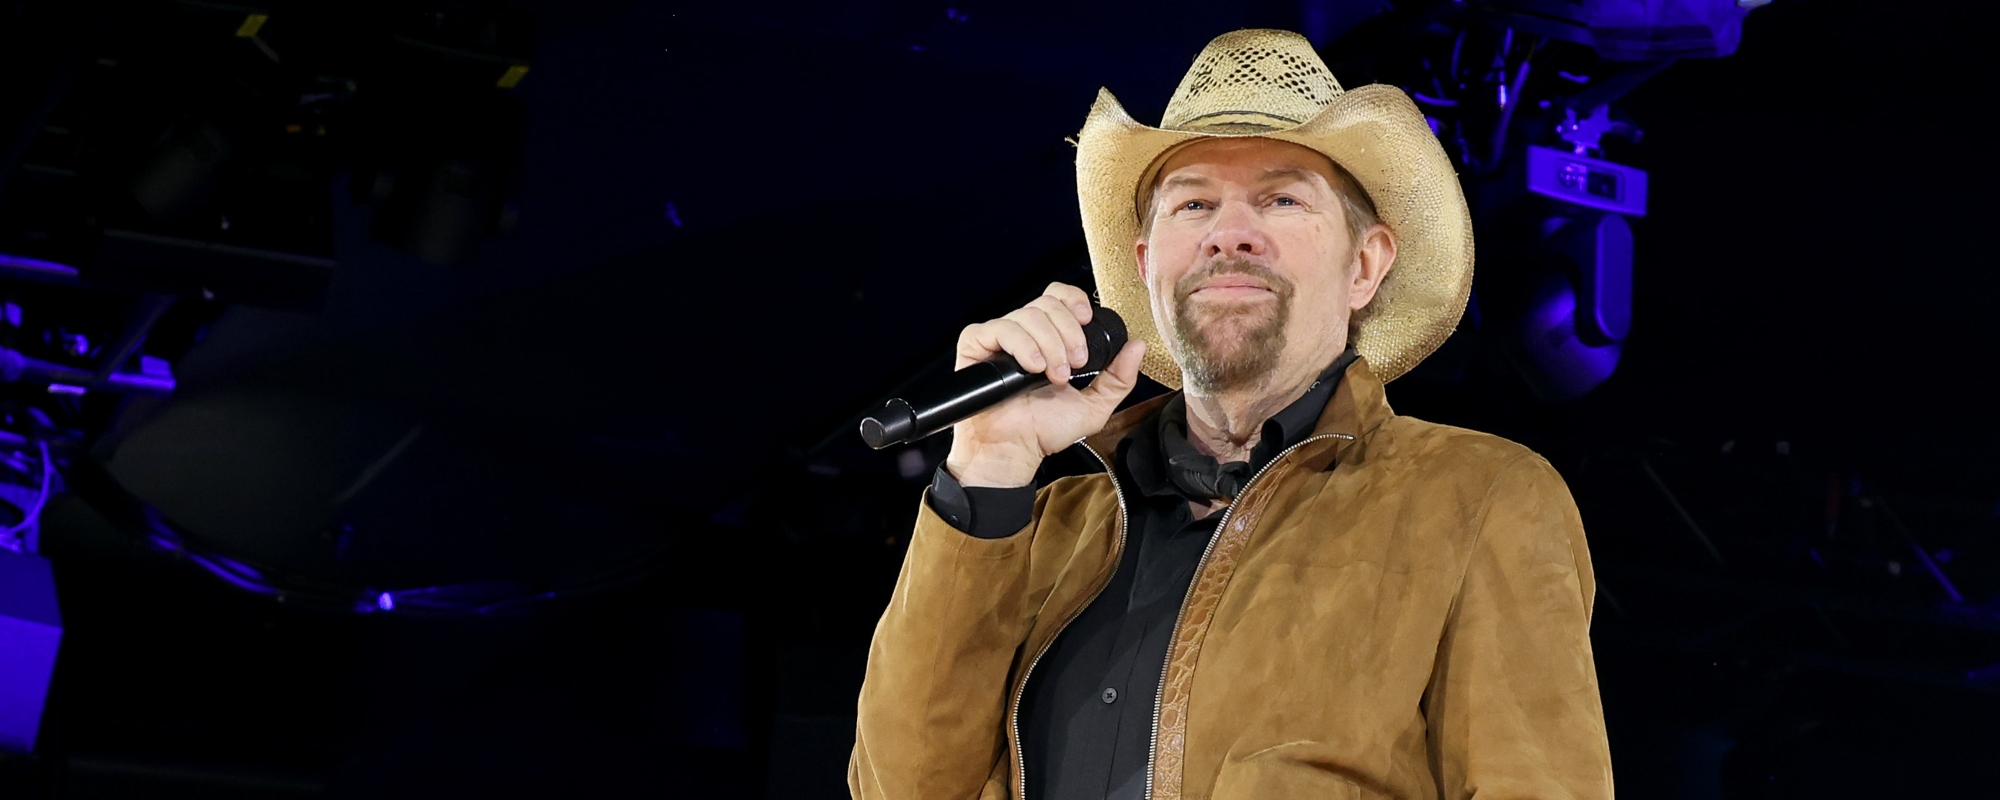 “You Can Feel It”: Taylor Swift Talks Toby Keith Influence In First-Ever TV Interview at 15 Years Old